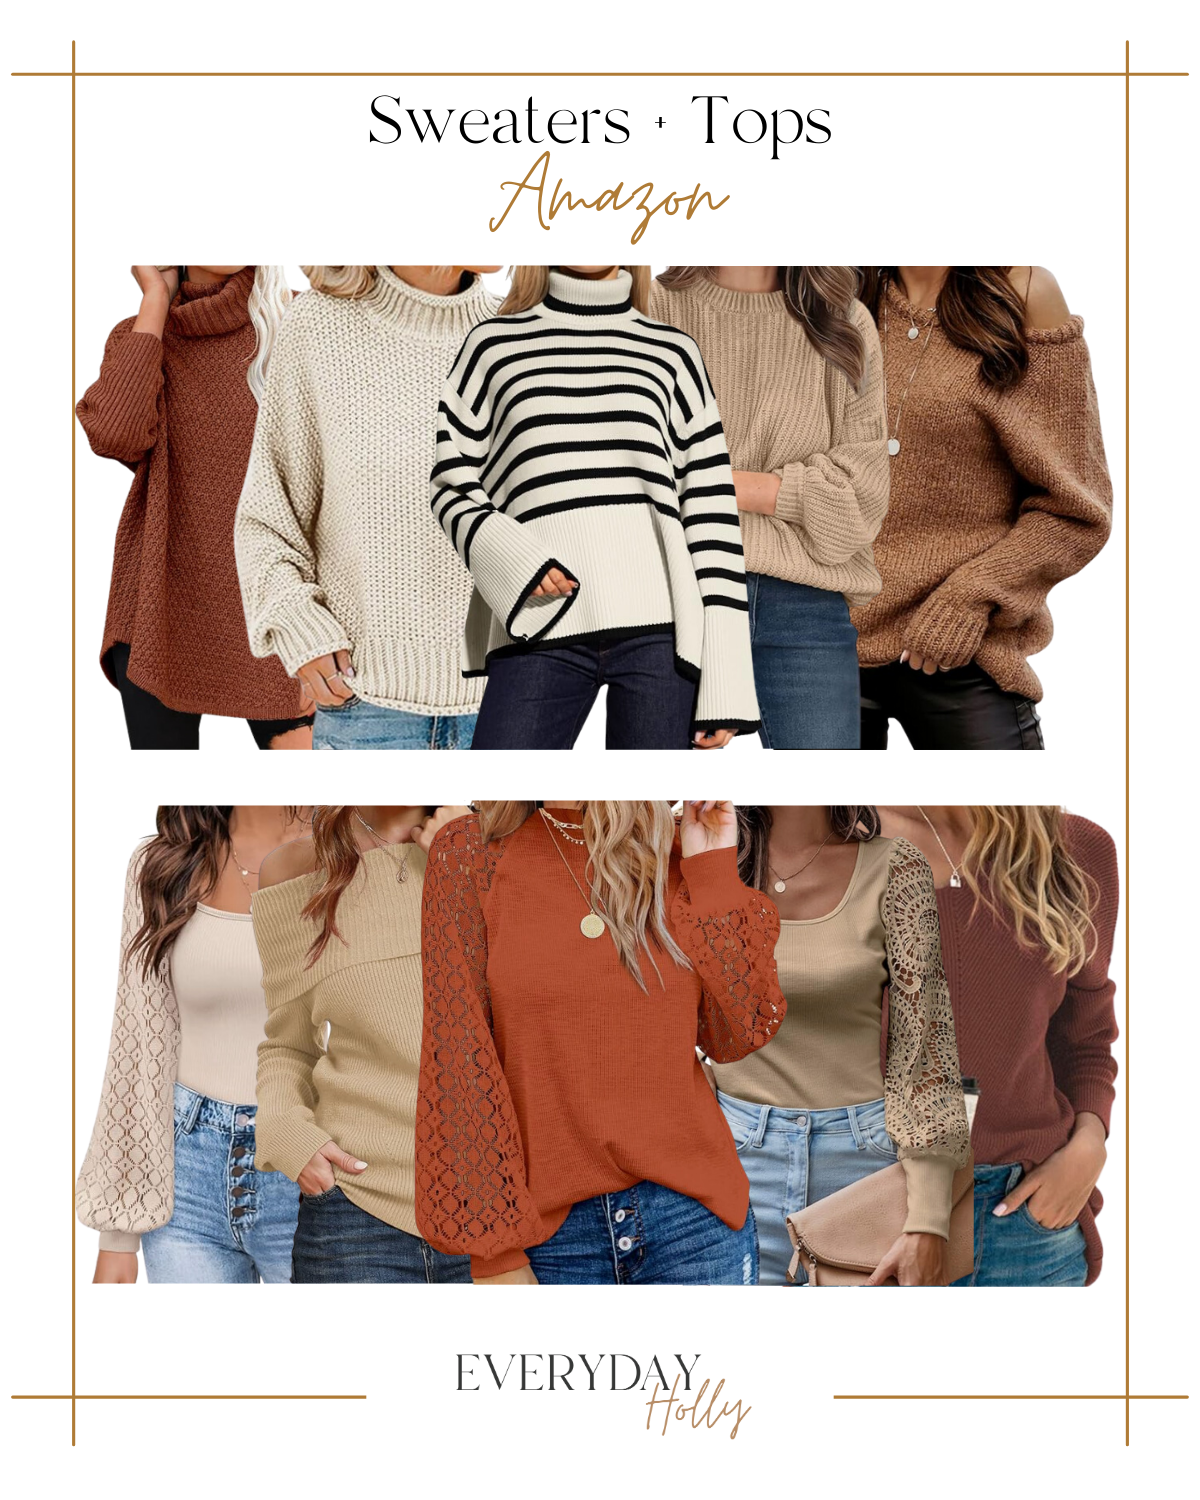 shop last minute thanksgiving outfit ideas and decor | #shop #thanksgiving #thanksgivingoutfit #homedecor #falloutfit #fallfashion #sweater #tops #stripes #neutral #turtleneck #blouse